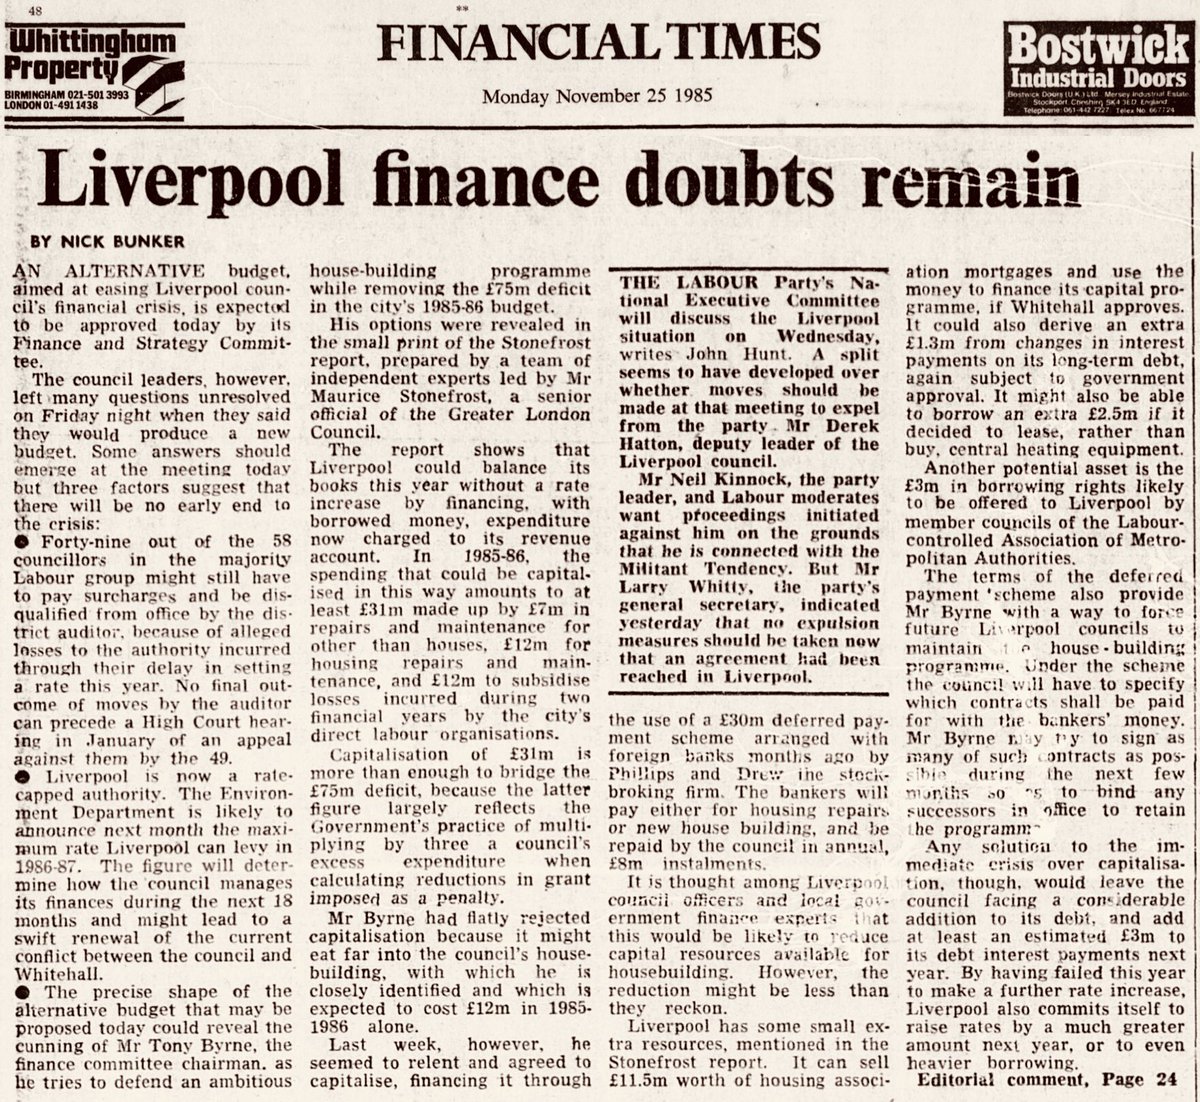 [2/5]In late November 1985 the finance chief at the Council, Tony Byrne, acquired the funds necessary to avoid mass sackings and maintain the Labour group’s housing programme. There were no mass redundancies.